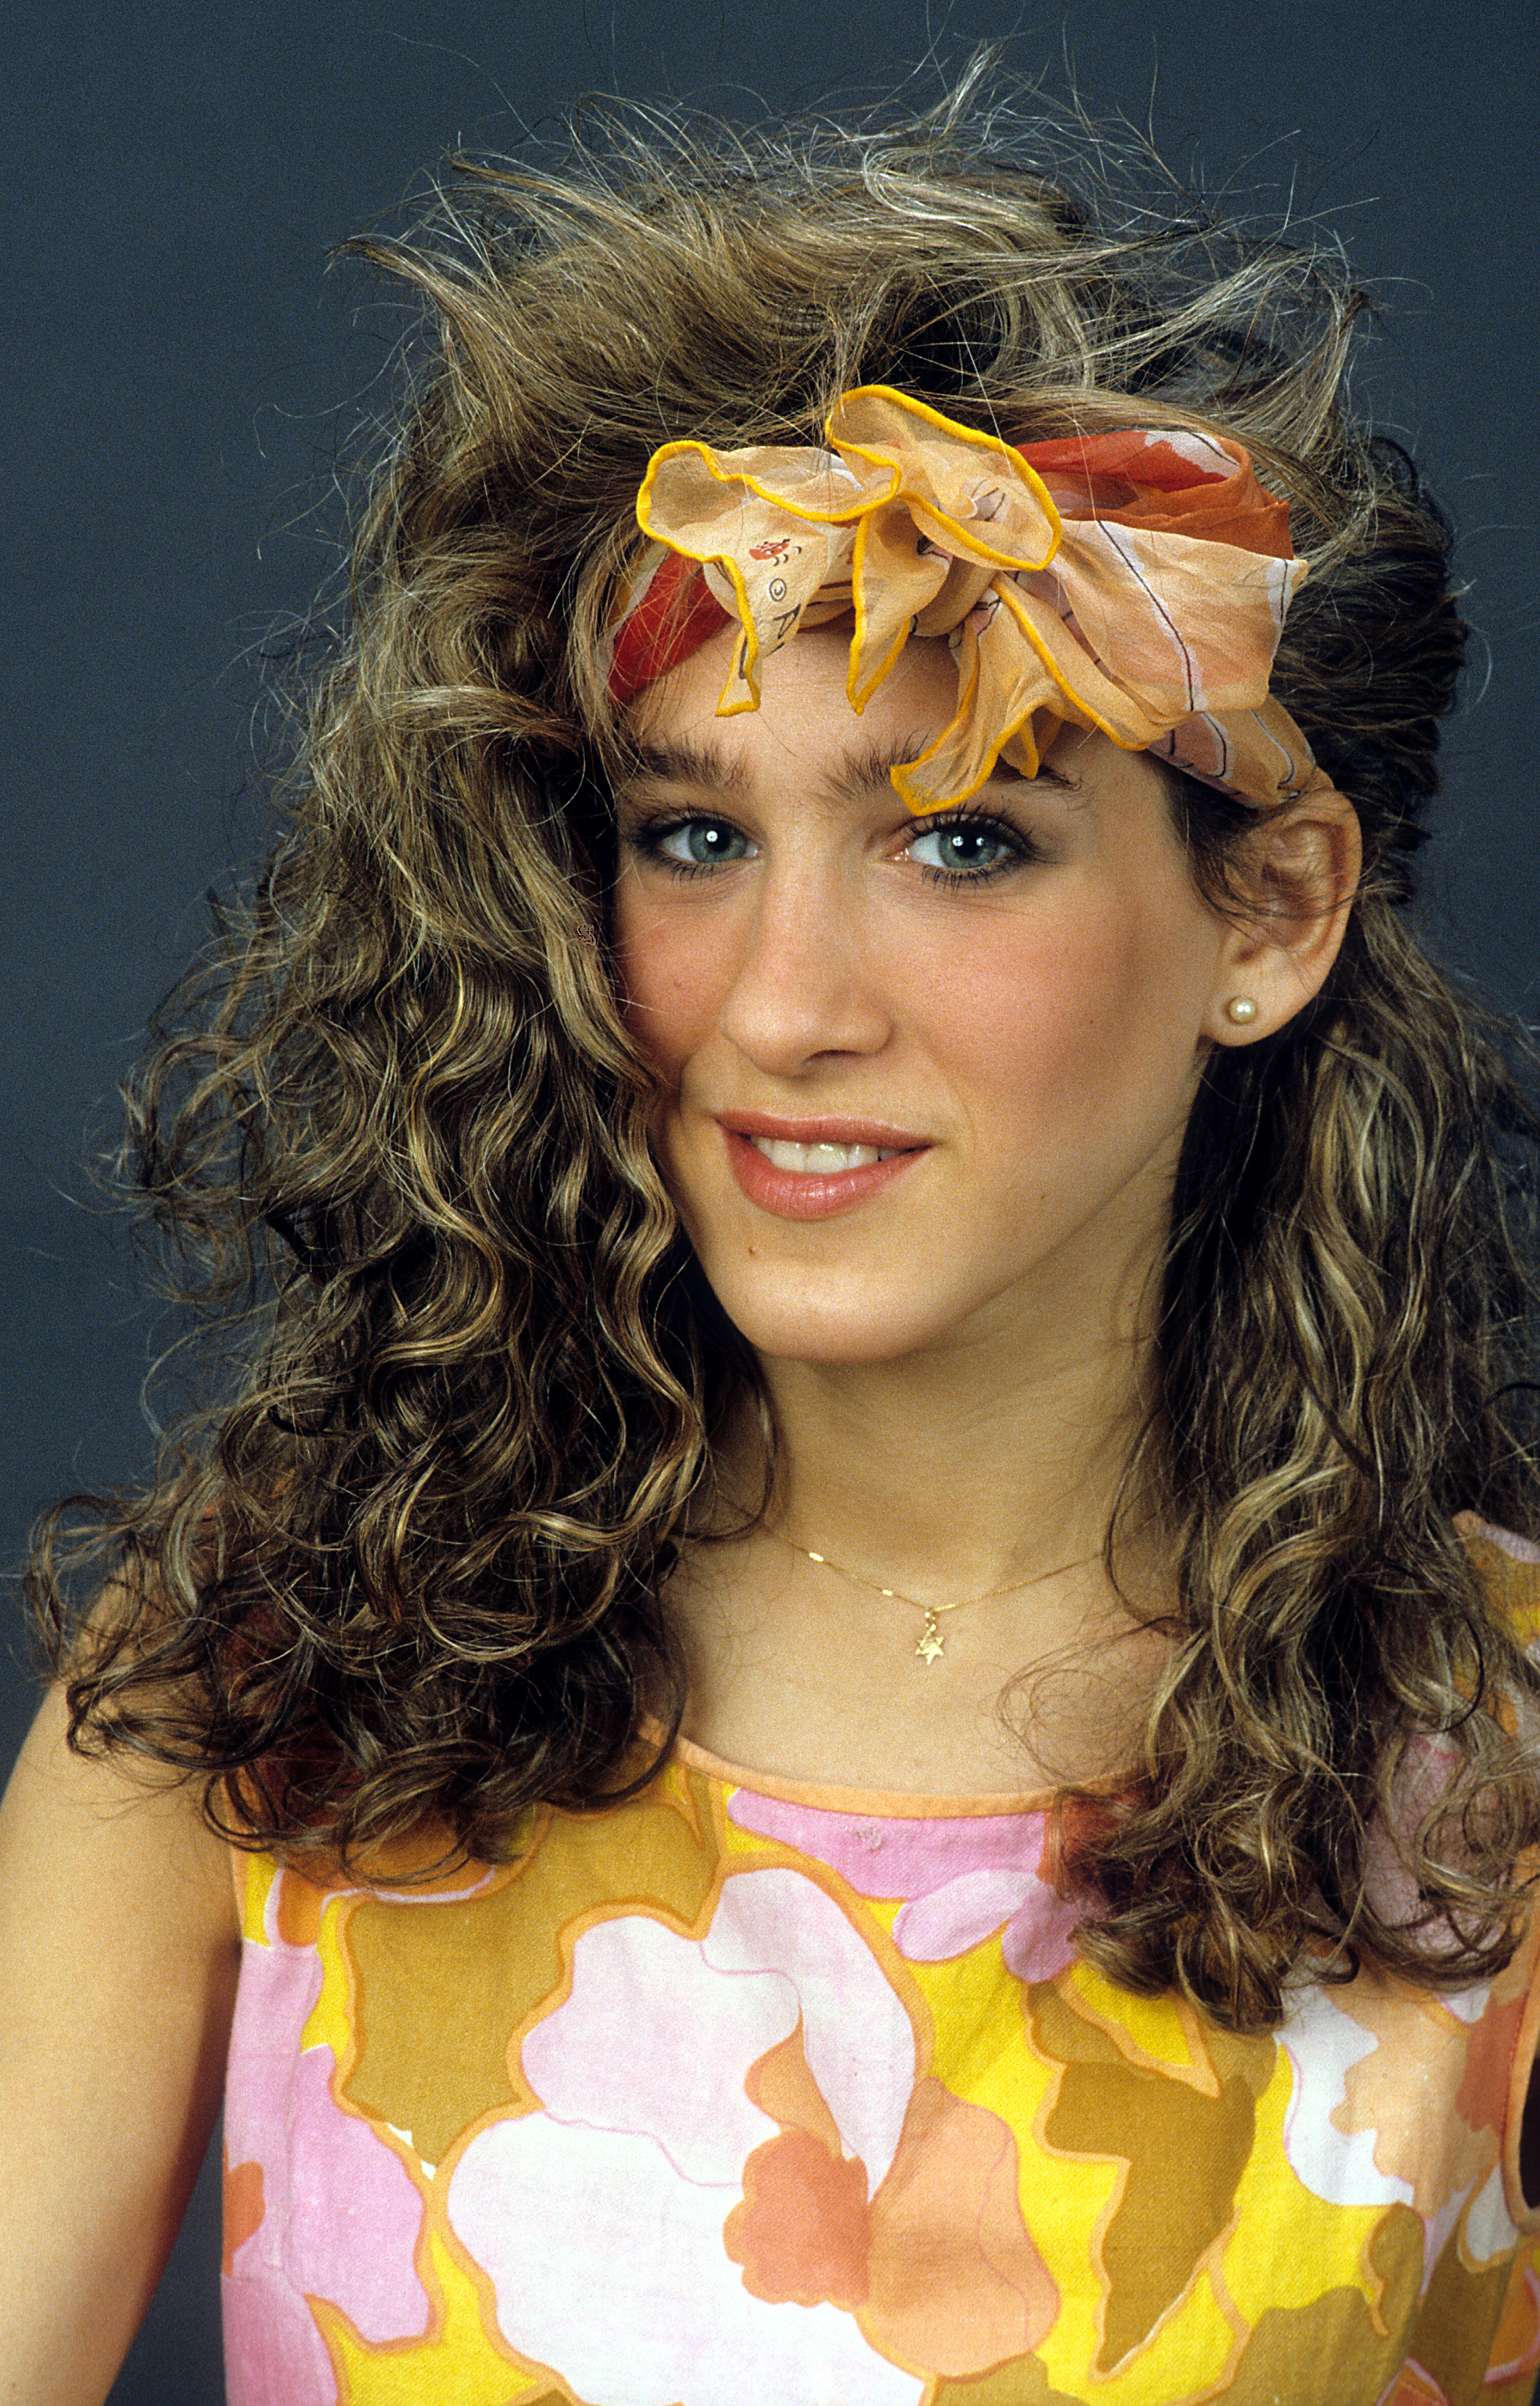 Sarah Jessica Parker poses for a portrait in 1985 | Source: Getty Images